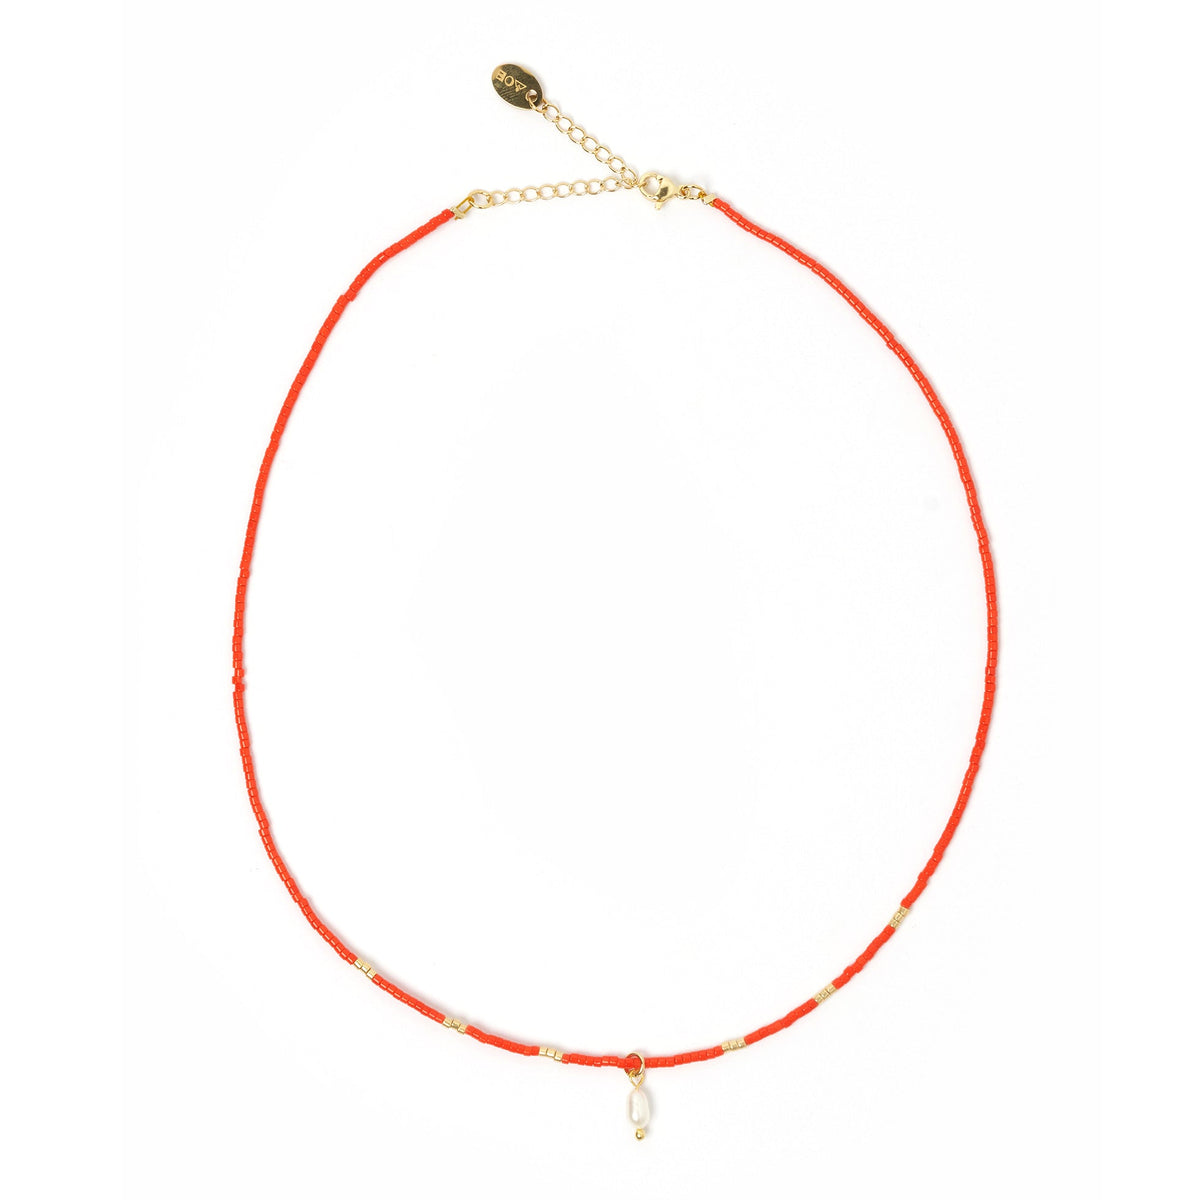 Arms of Eve Zara Necklace - Scarlet Red